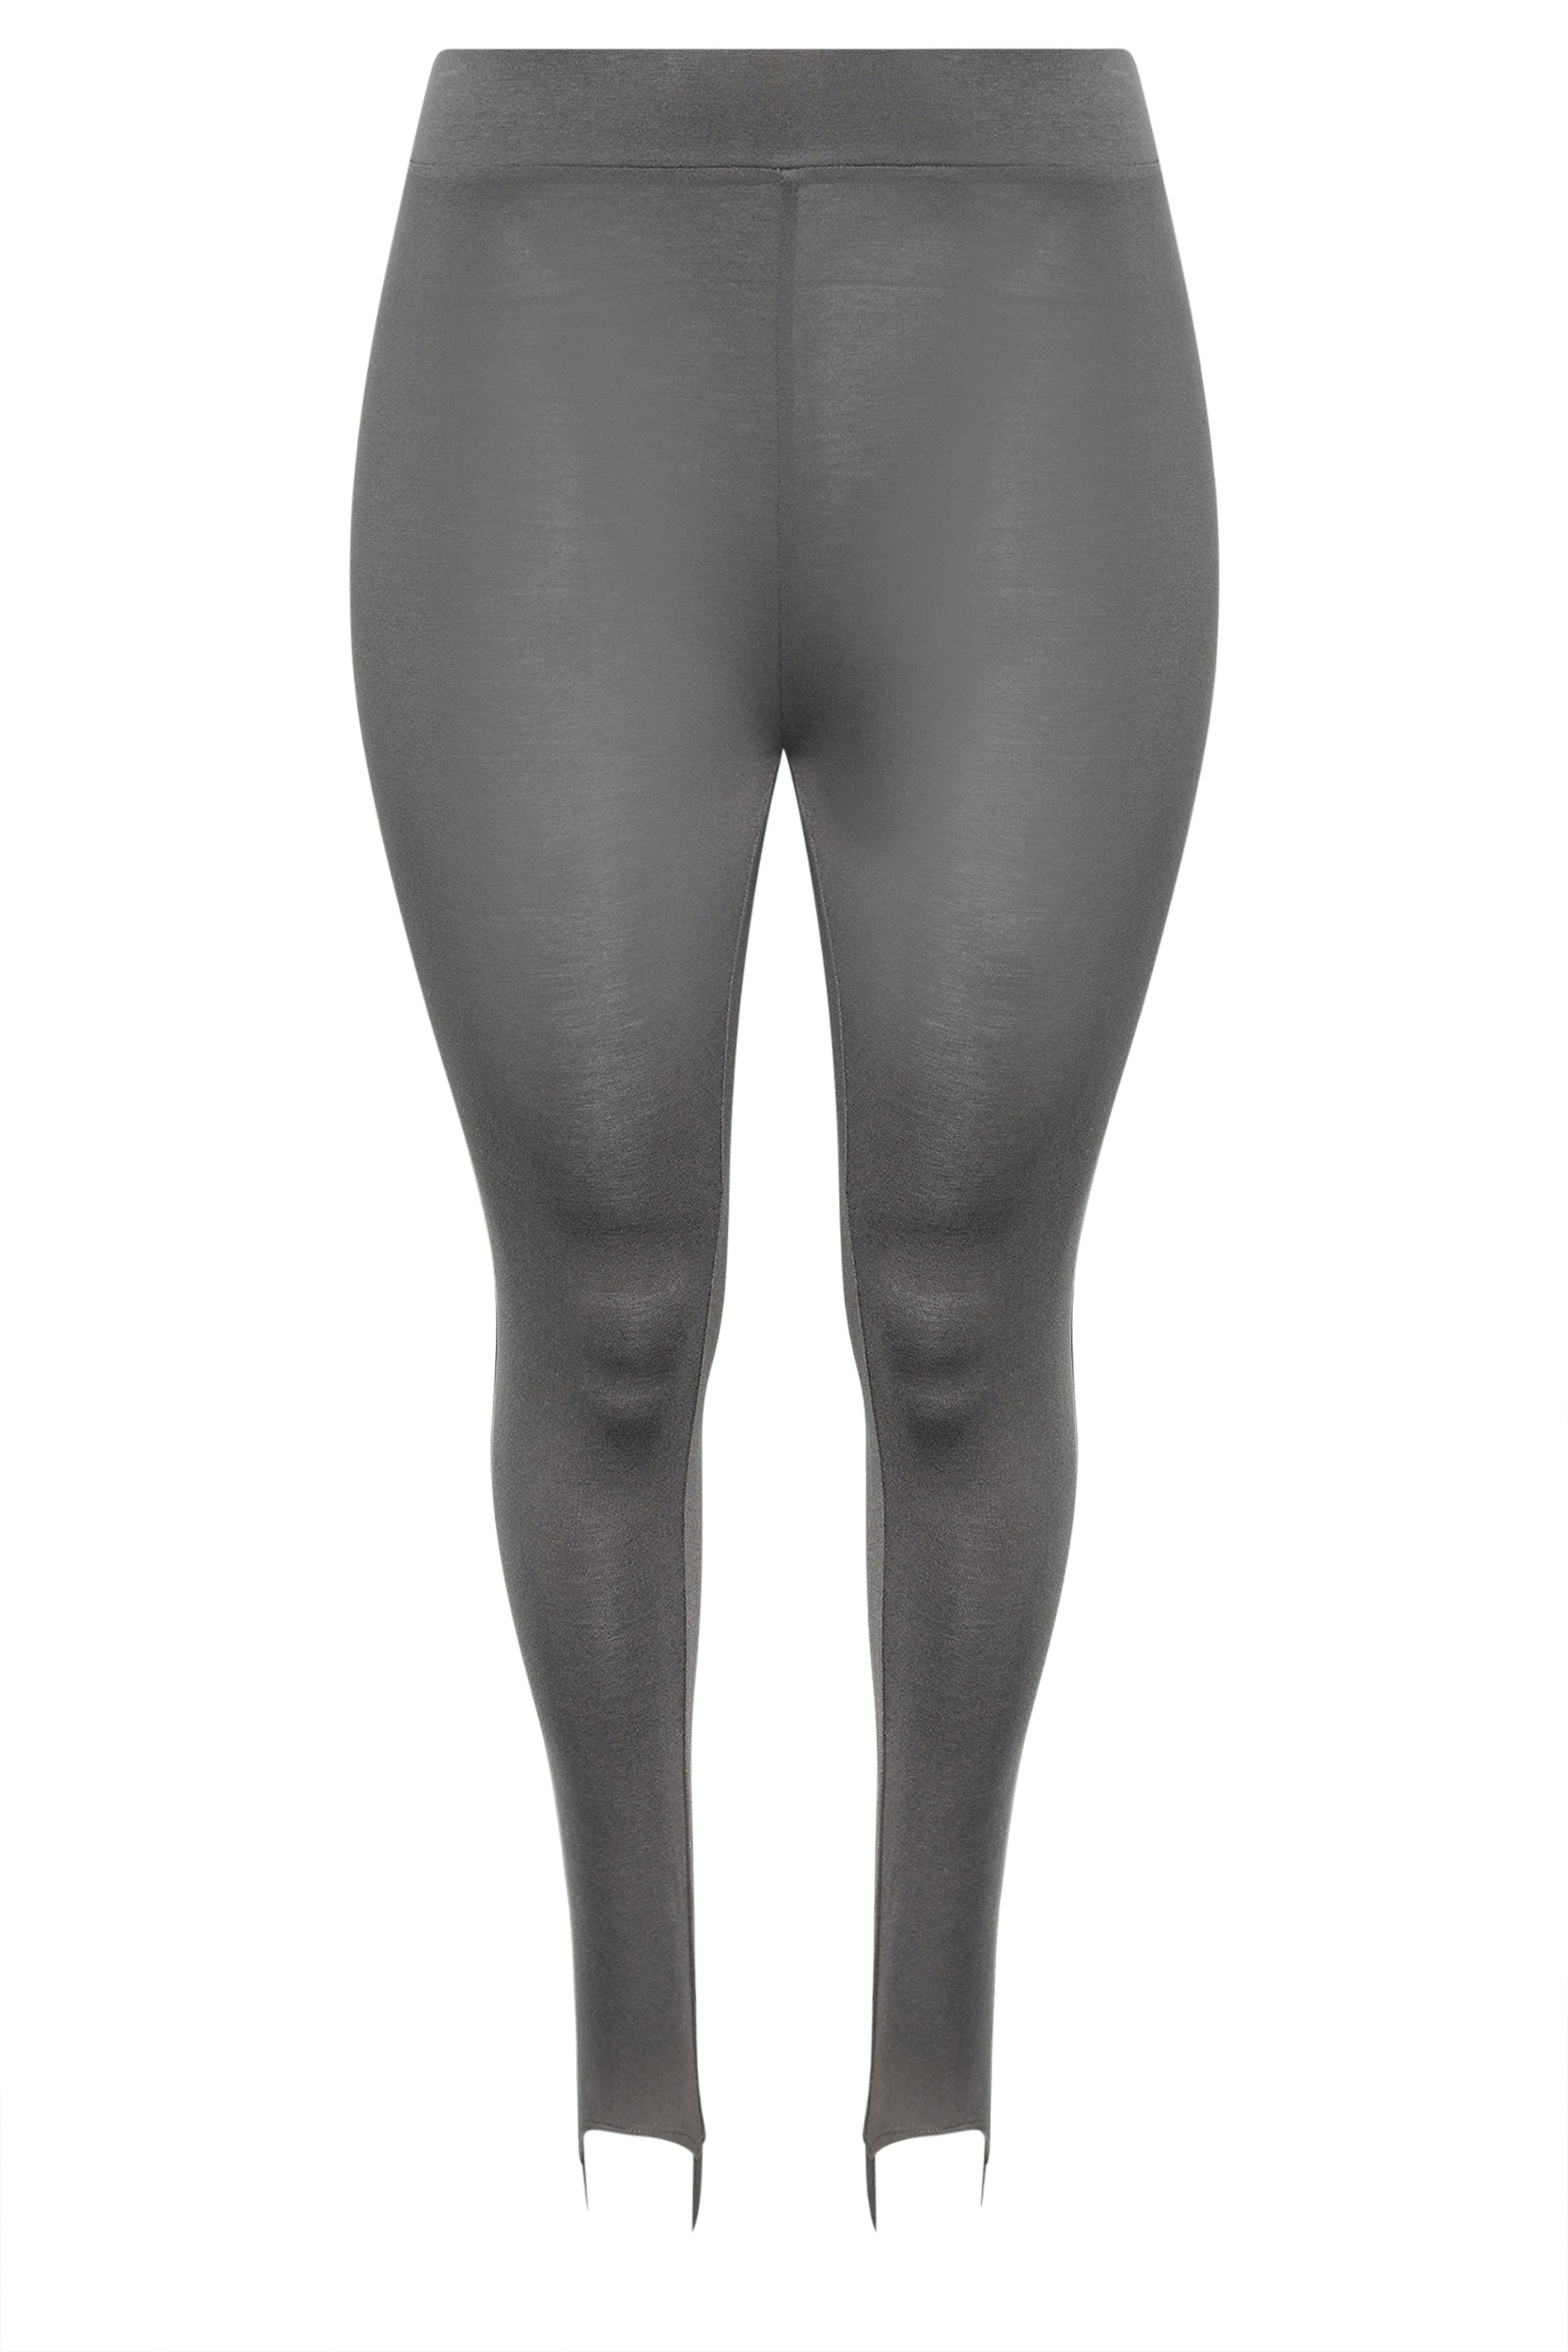 Buy Yours Curve Brown Bengaline Stirrup Leggings from the Next UK online  shop